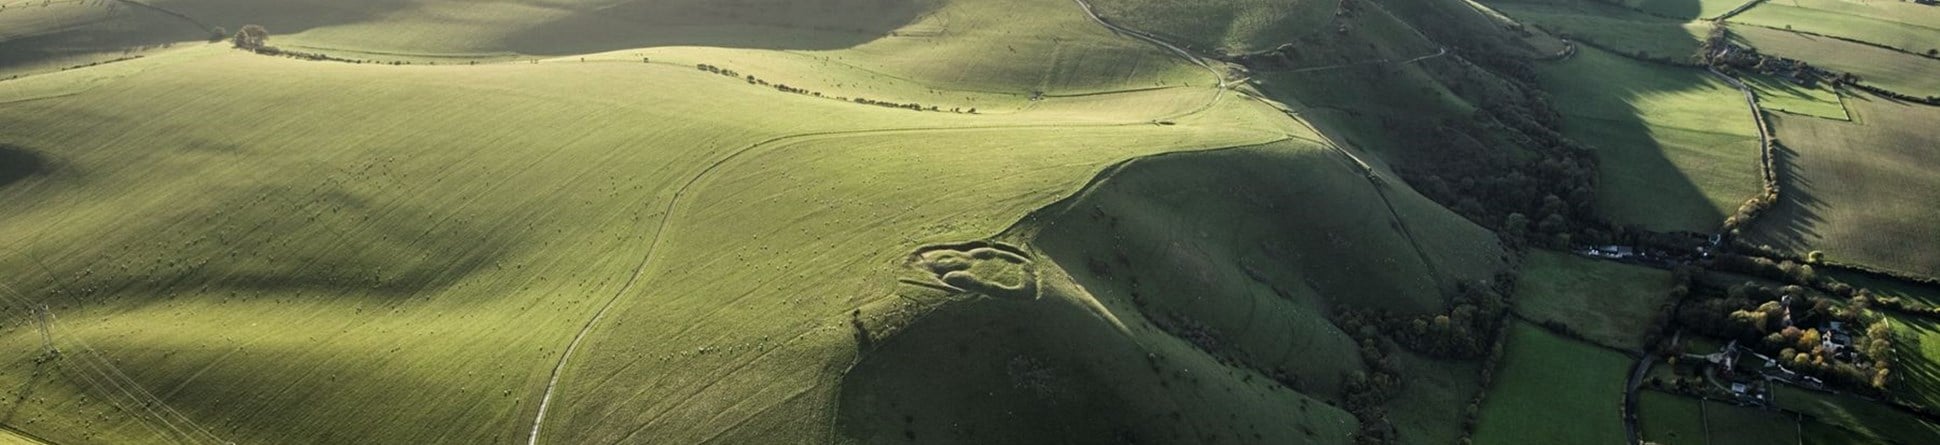 Aerial photo of the South Downs. A circular earthwork can be seen on a prominent ridge.